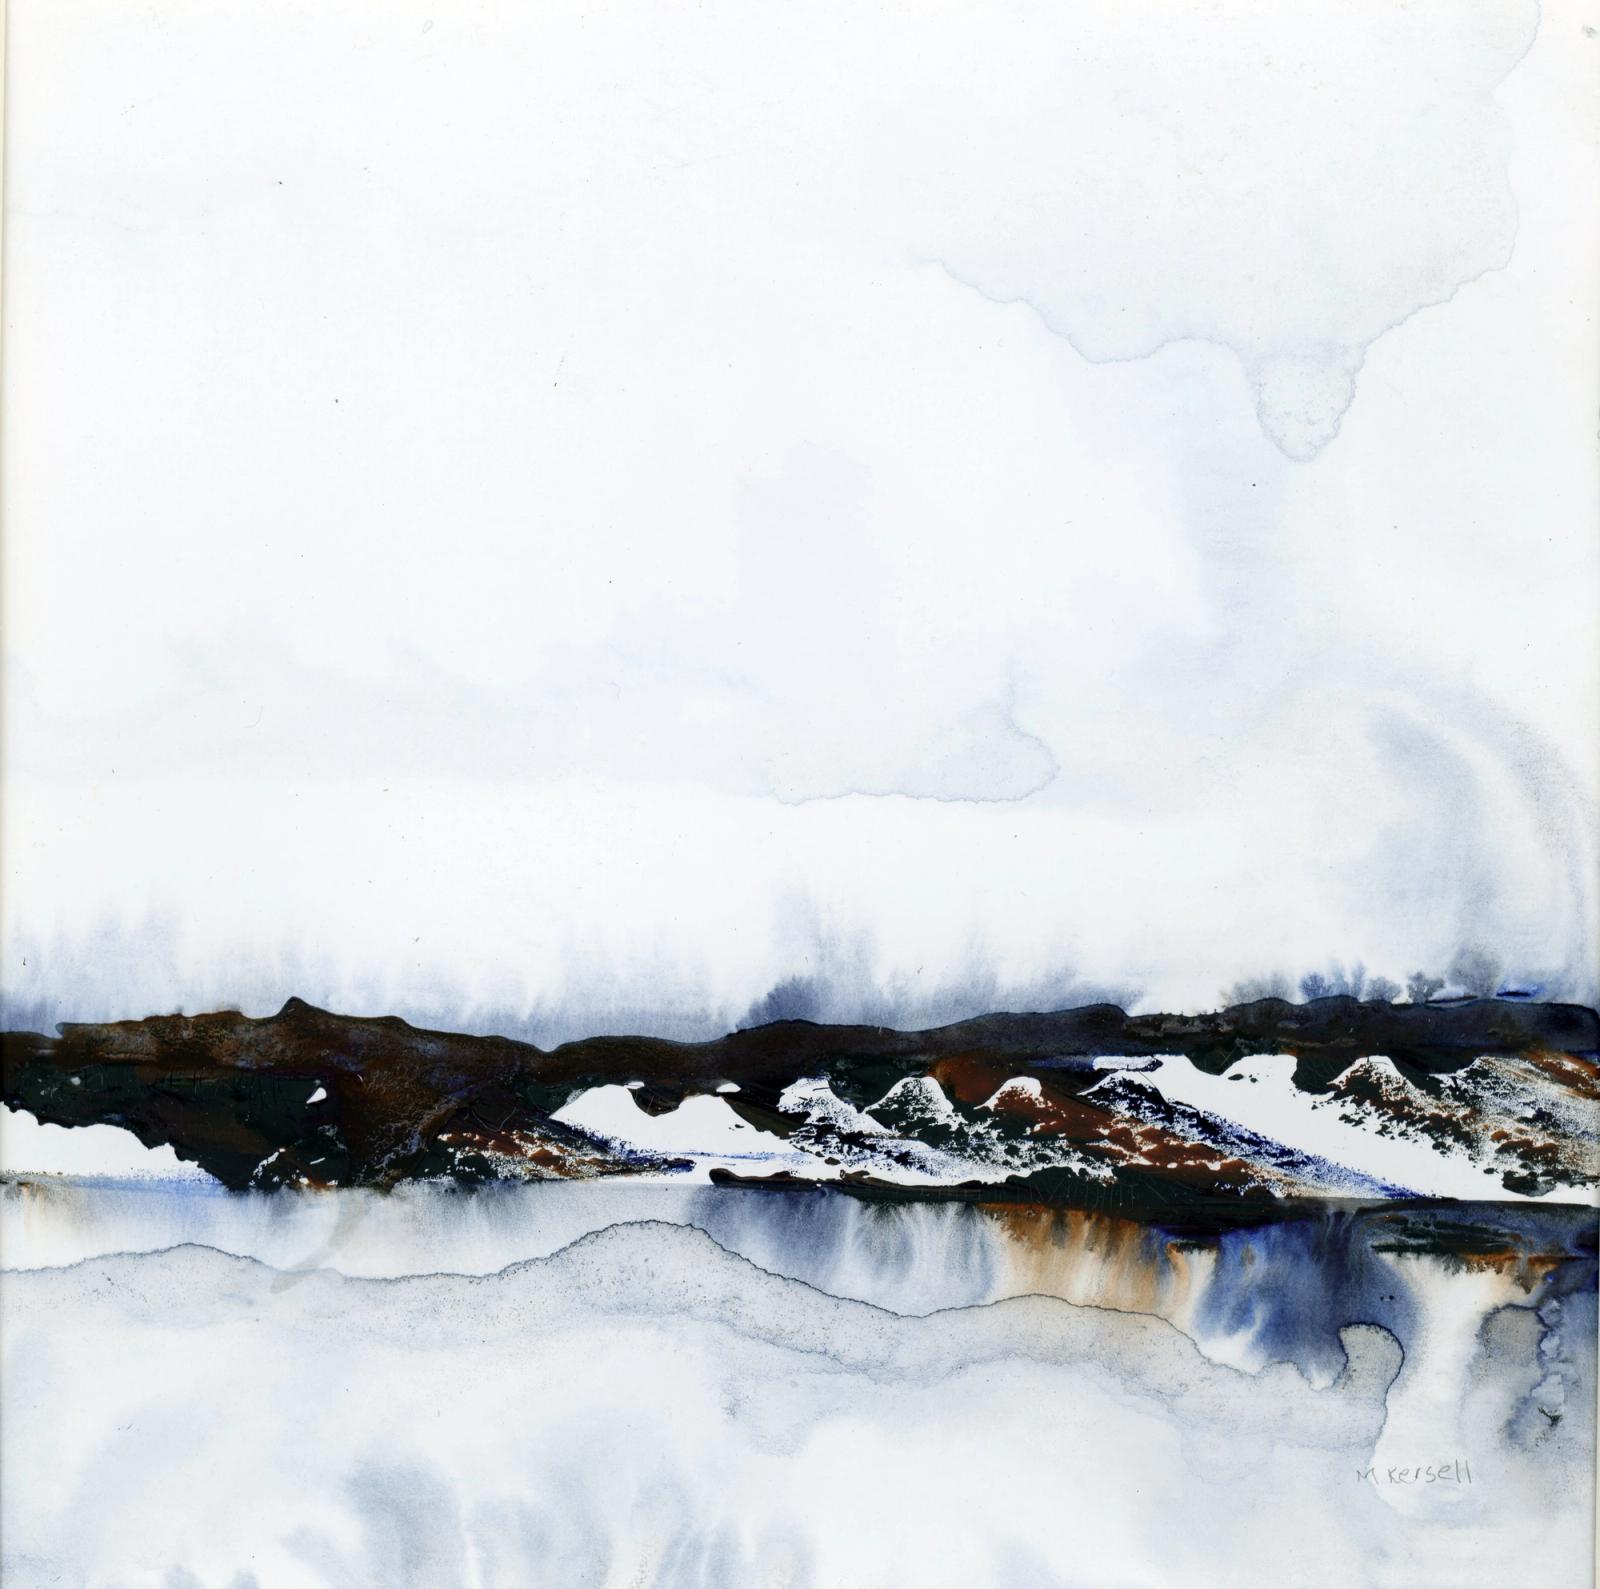 An abstract watercolor suggesting a dark bank reflected in water